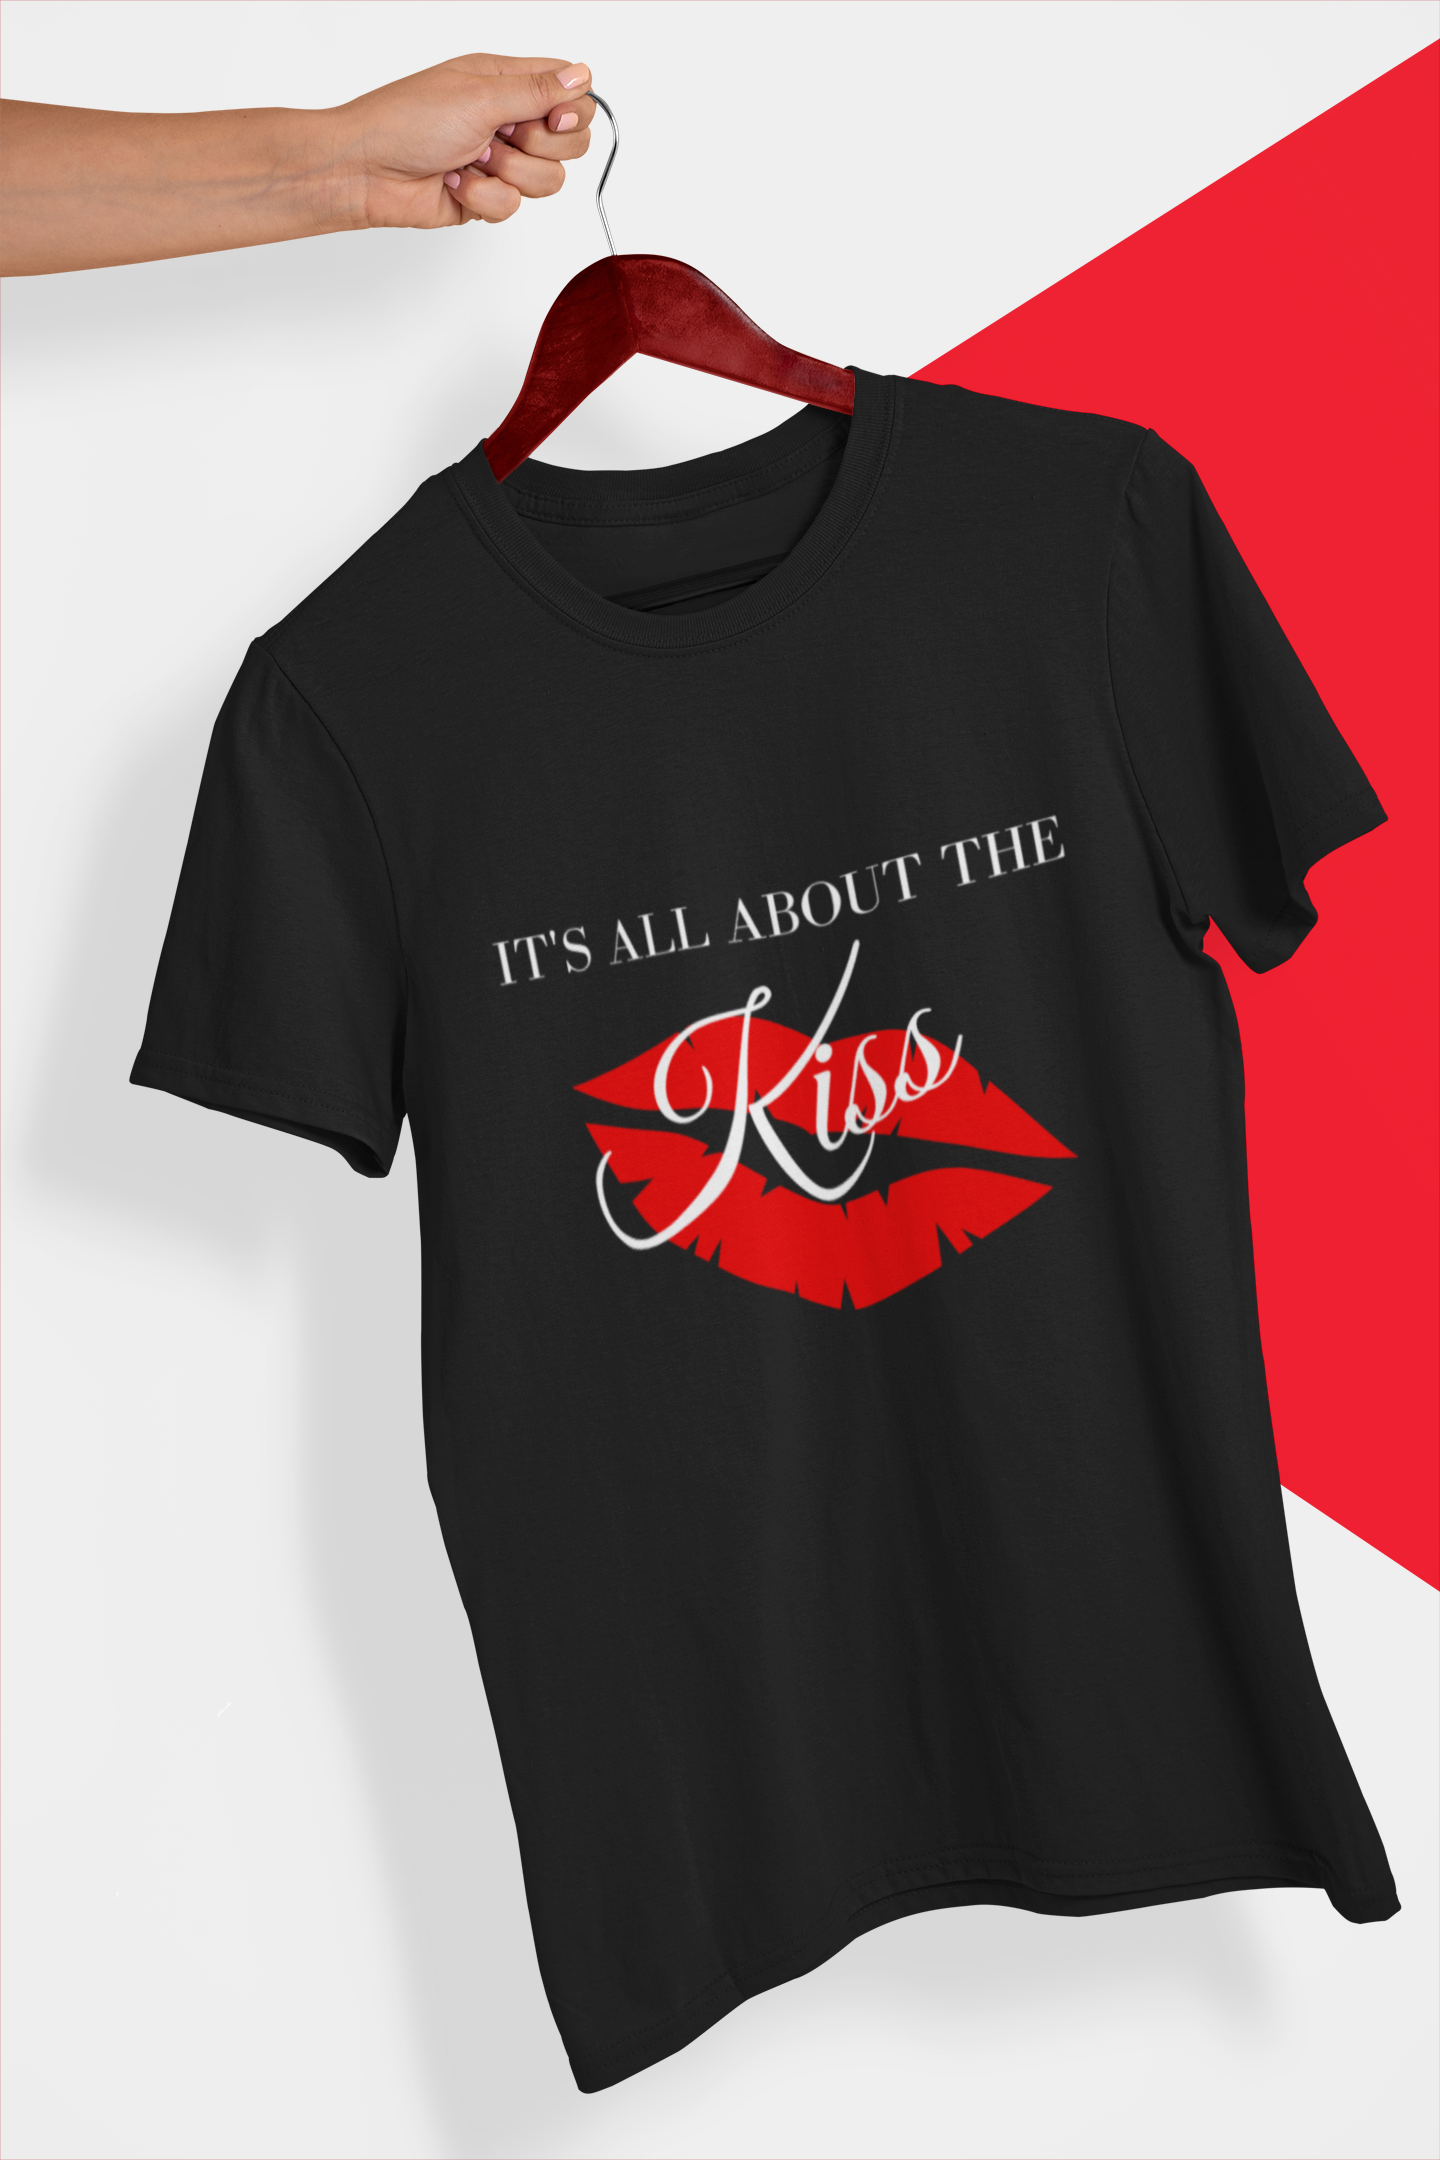 IT'S ALL ABOUT THE KISS - Women's Relaxed T-Shirt